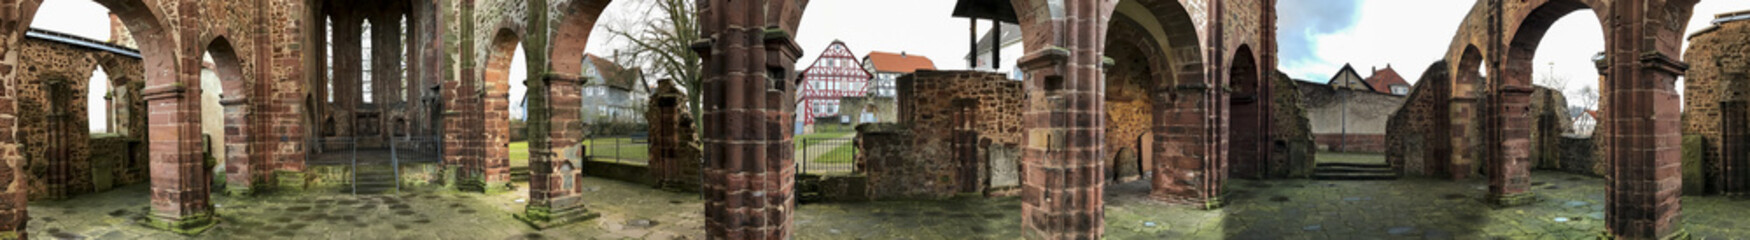 Panoramic view of old church ruin.